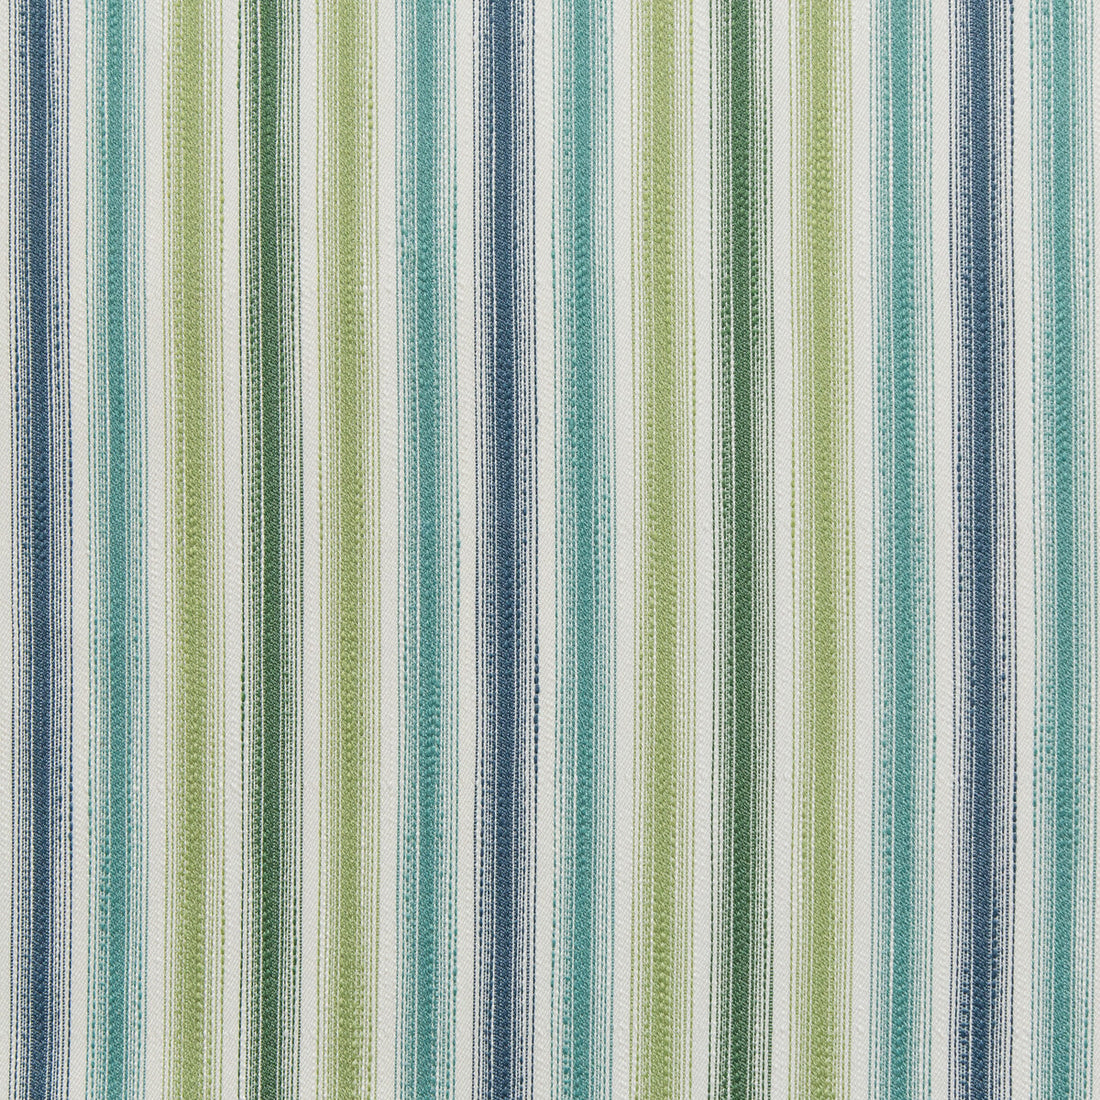 Bella Vita fabric in oasis color - pattern 35833.513.0 - by Kravet Design in the Indoor / Outdoor collection